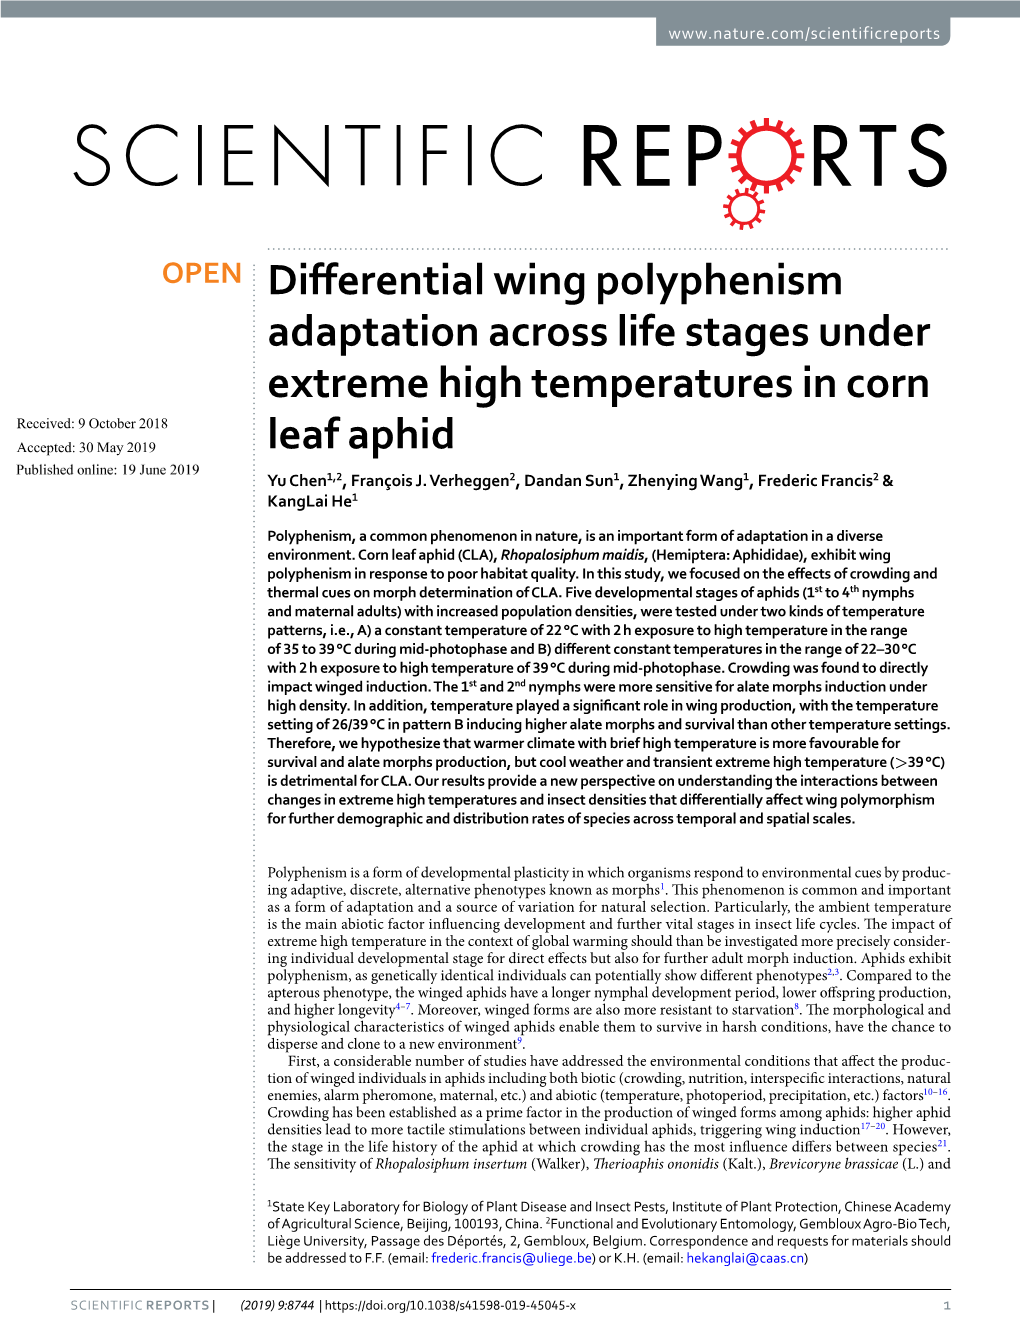 Differential Wing Polyphenism Adaptation Across Life Stages Under